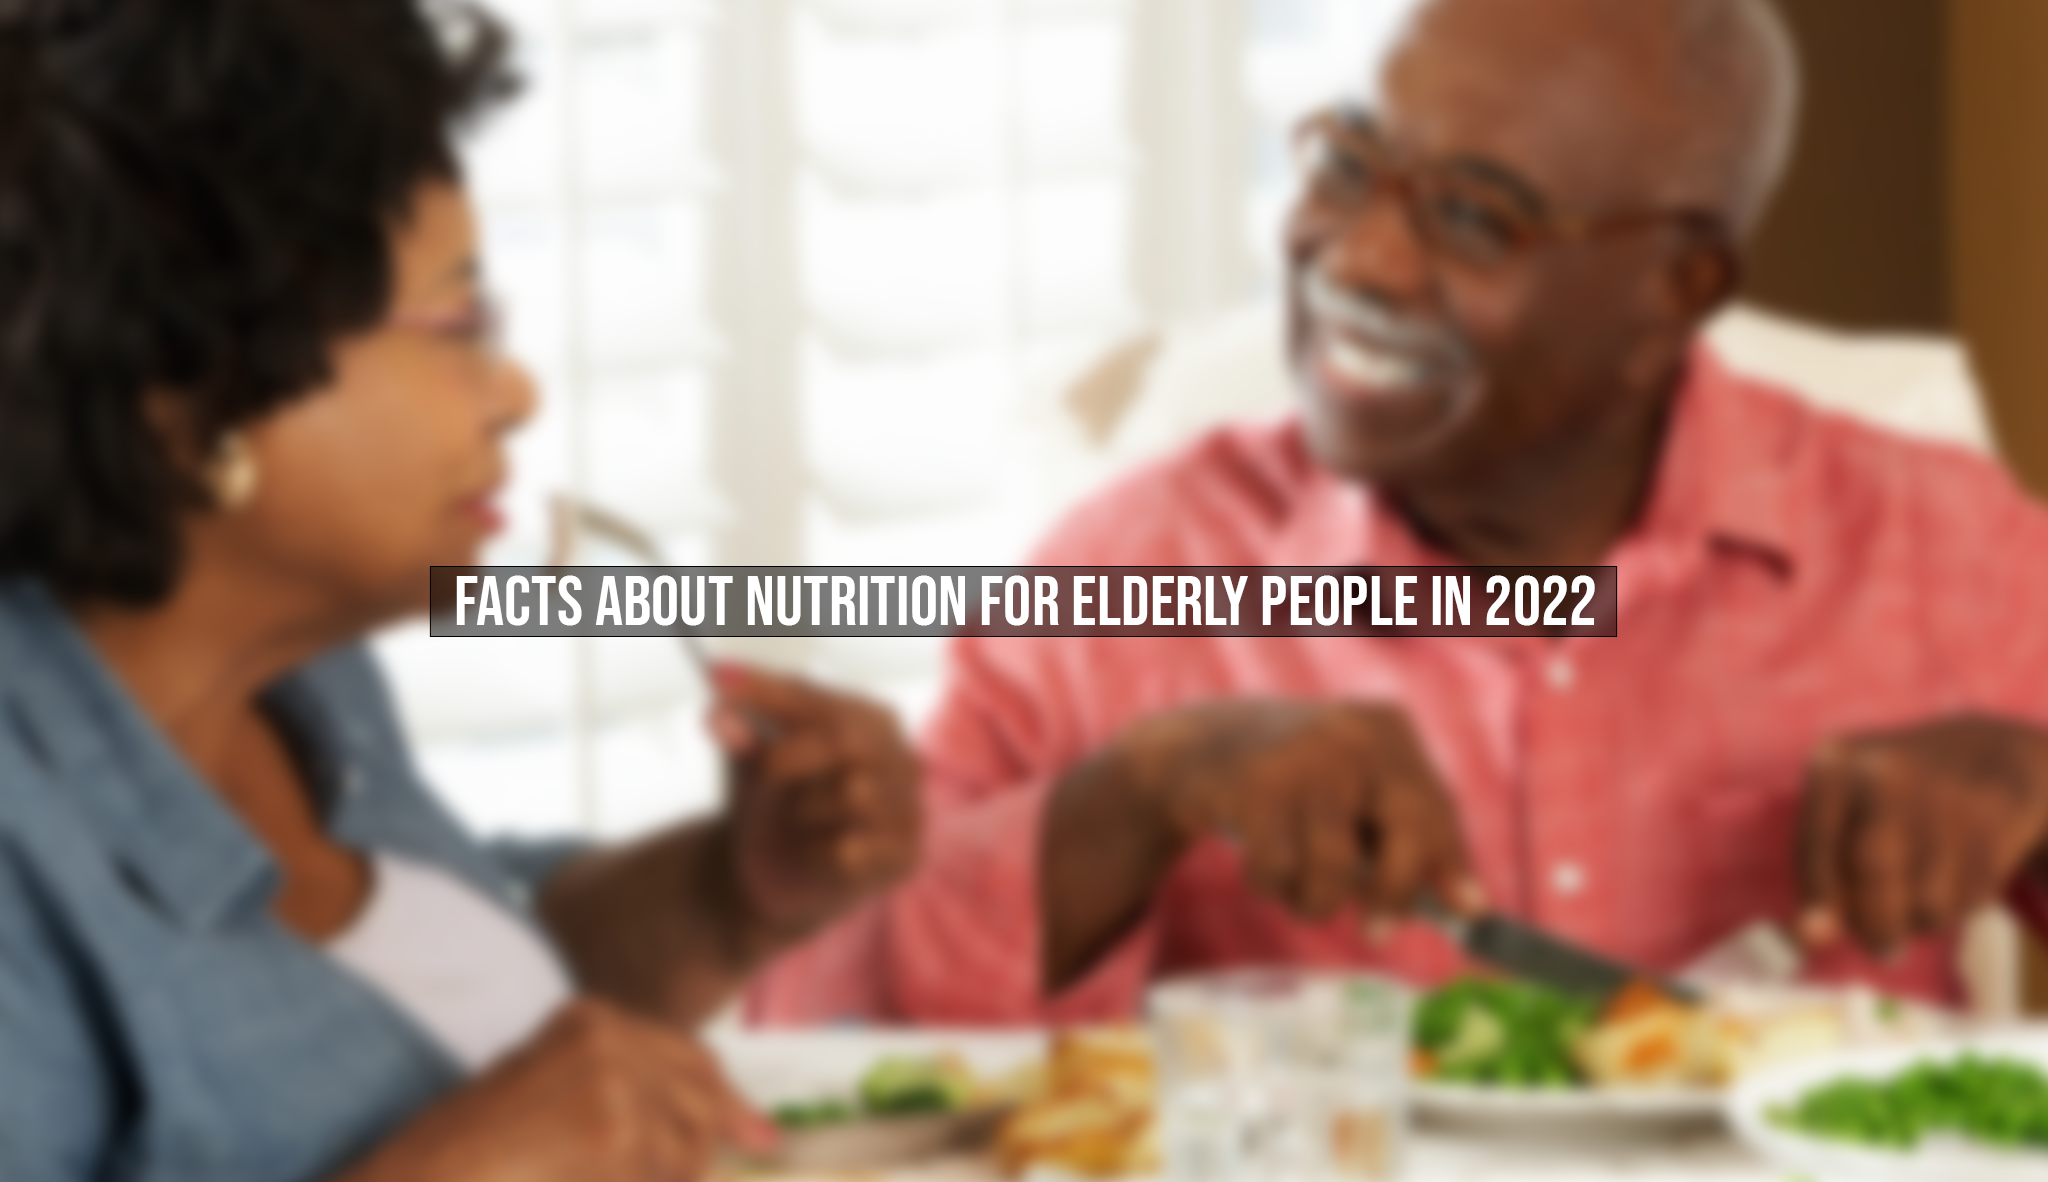 Facts about Nutrition for elderly people in 2022